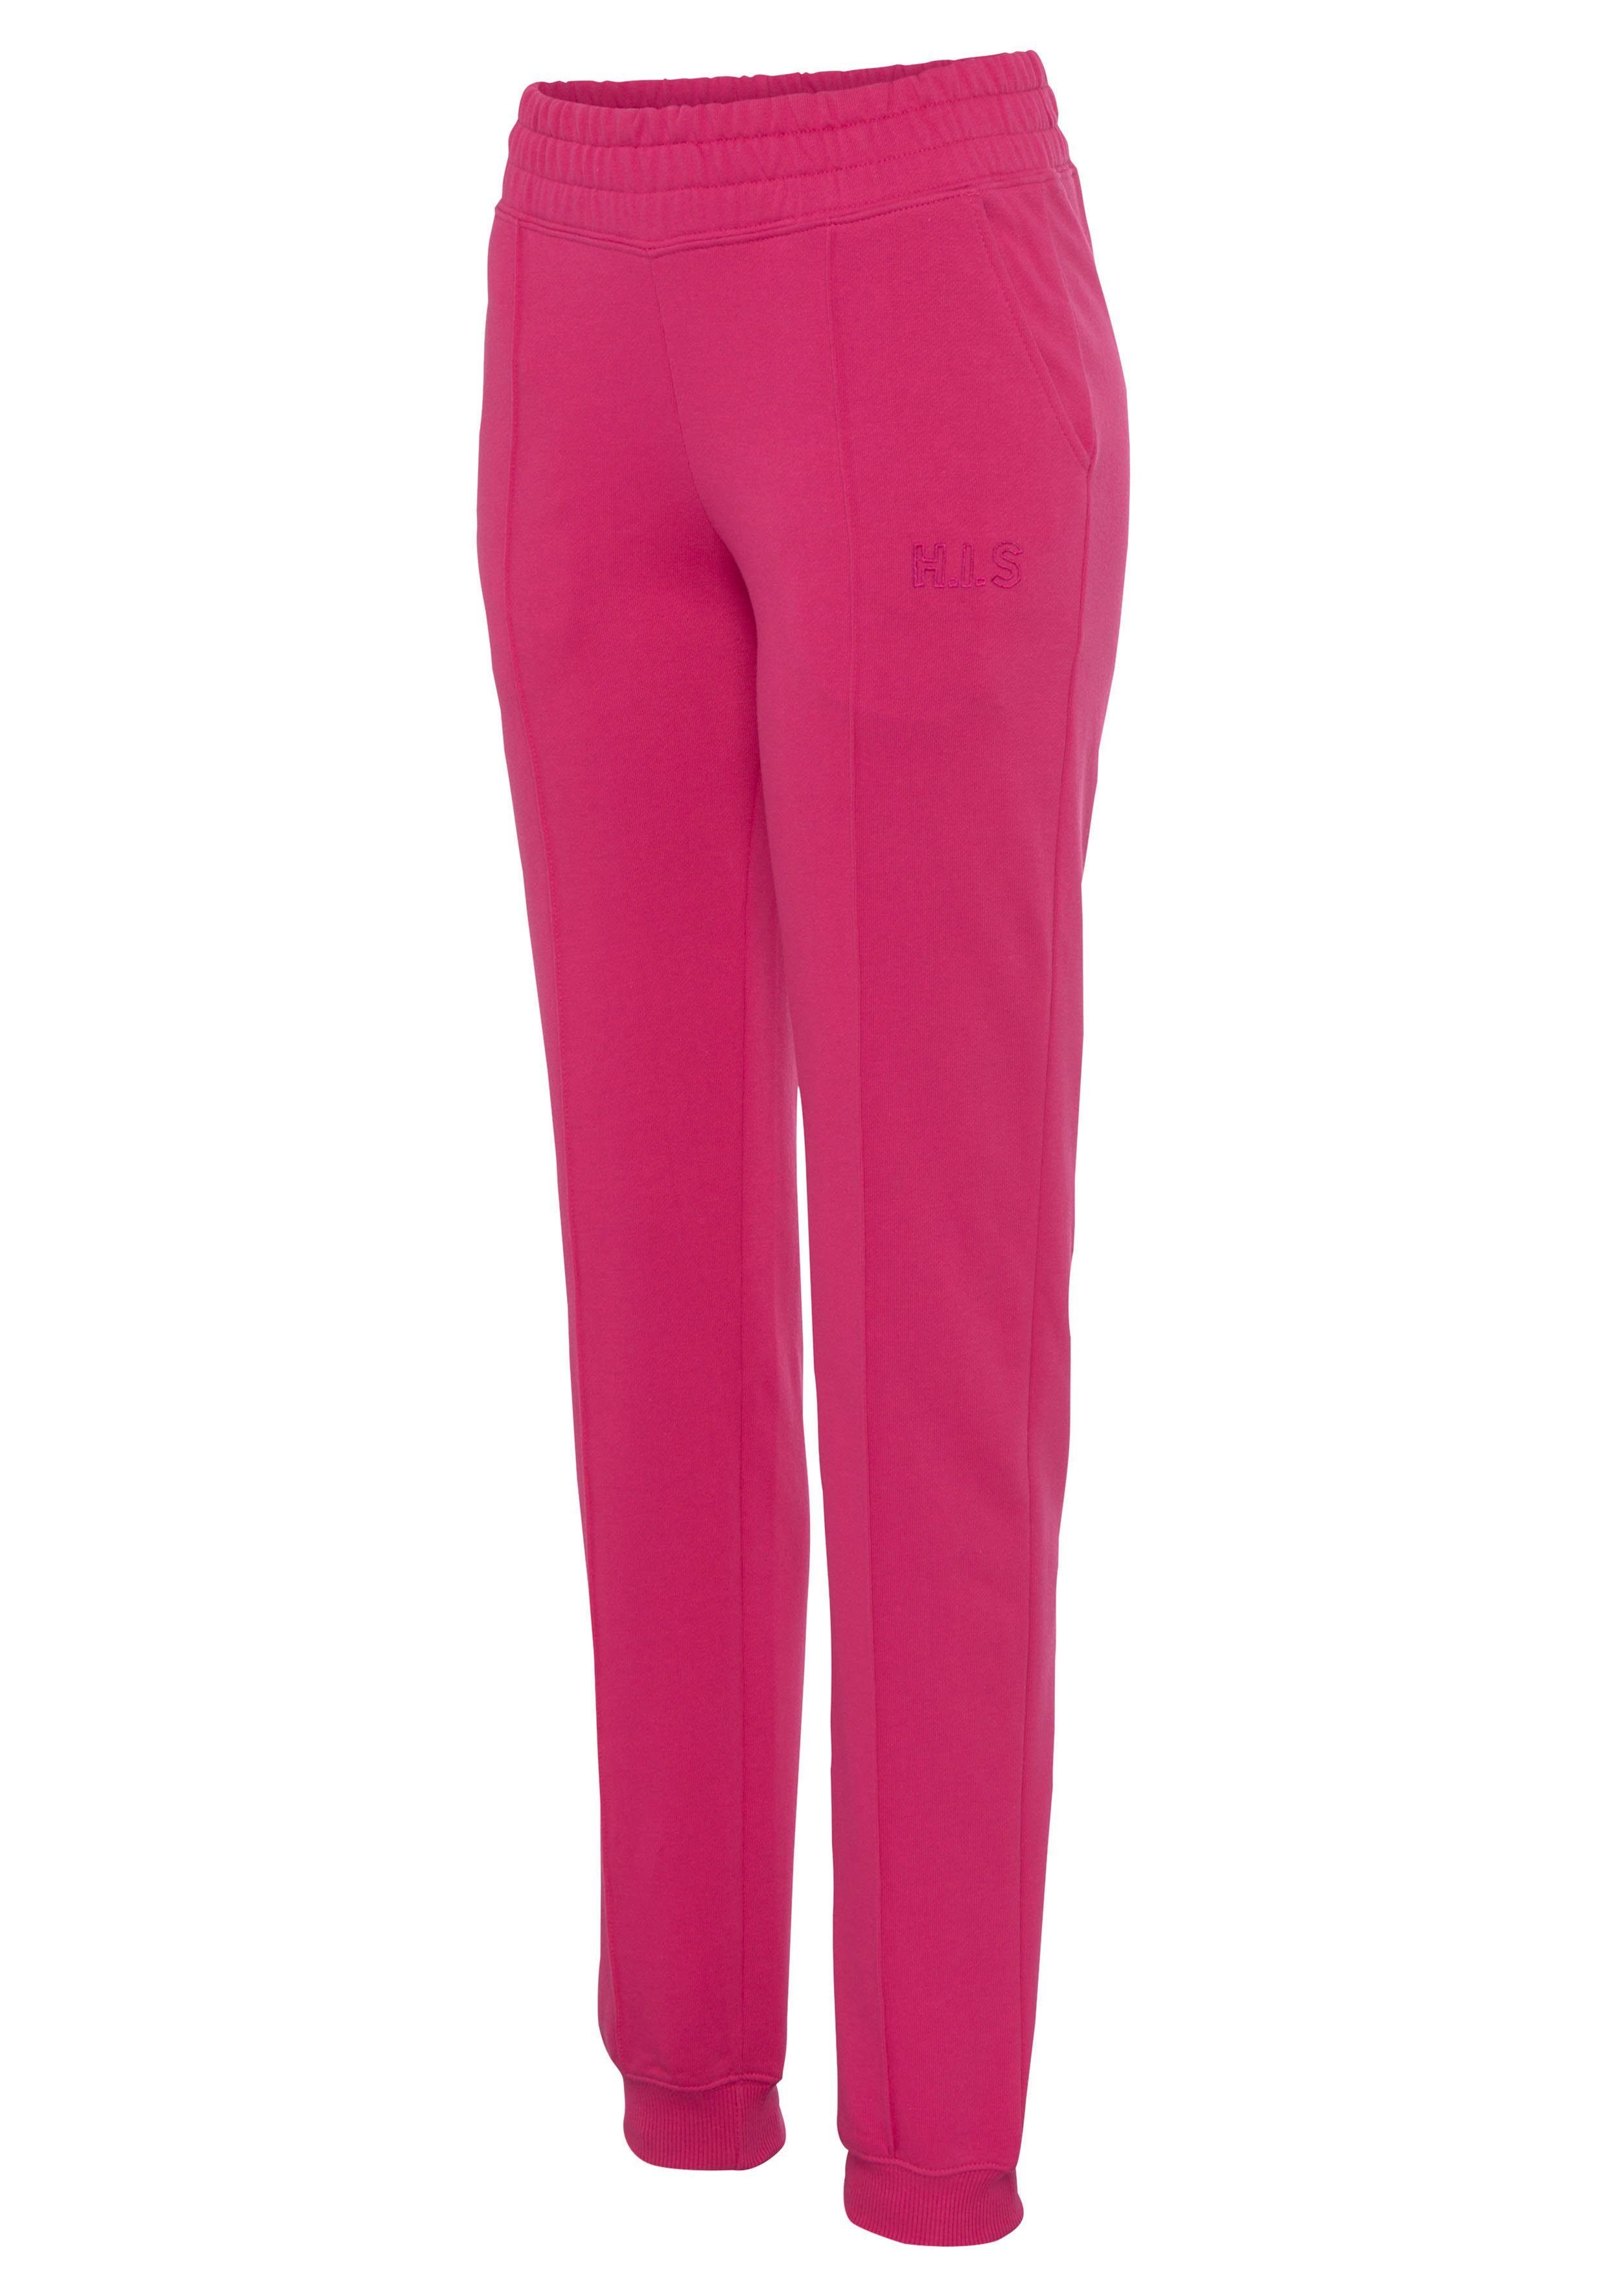 Relaxhose Piping H.I.S pink mit Loungeanzug vorn,